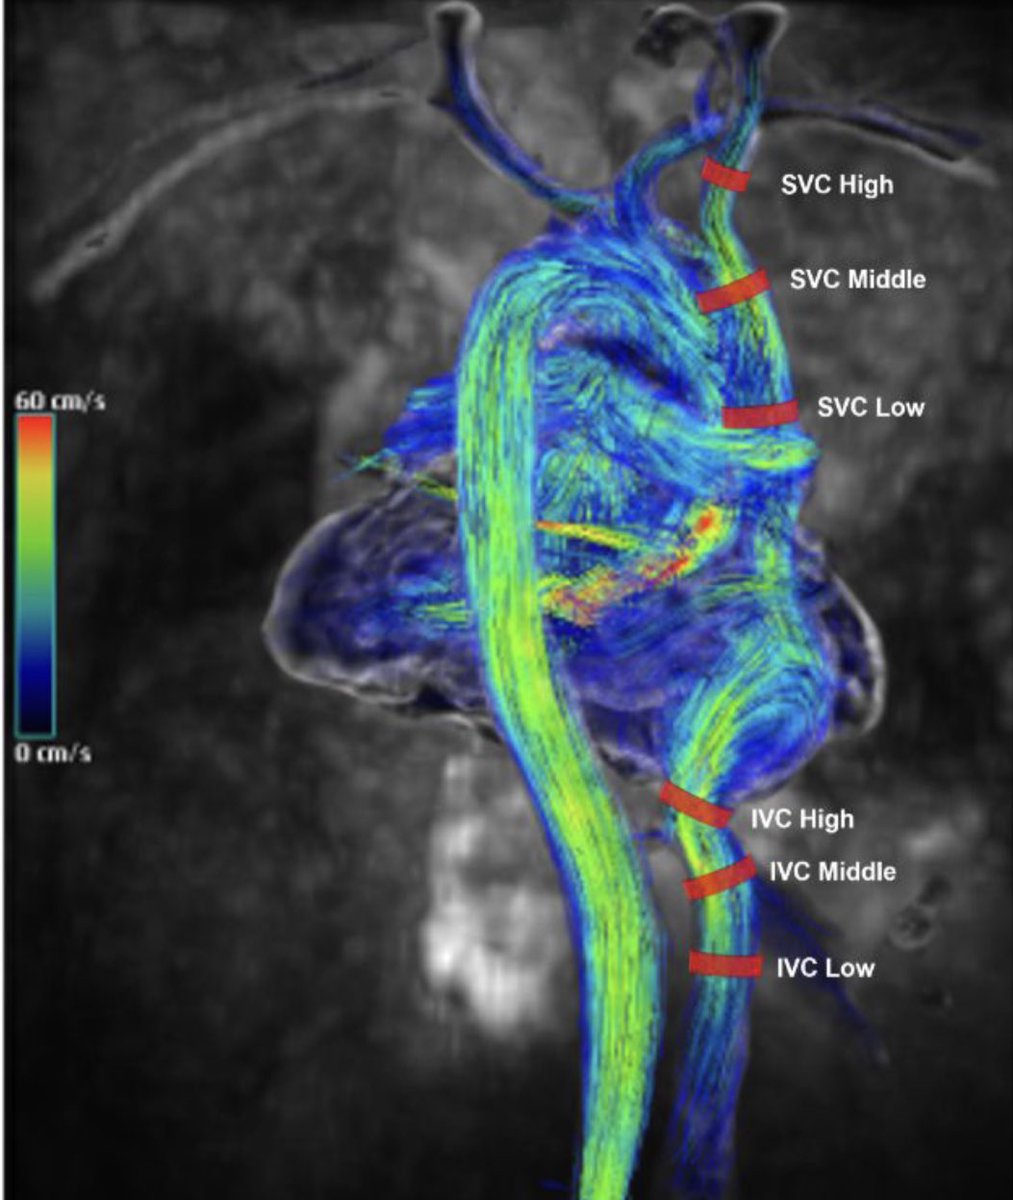 Delighted to attend #SCMR23 and show our results on vena cava blood flow quantified by #4Dflow in patients with pulmonary hypertension.

@bdallen6 @JackCerne @JamesCCarrMD @NURadiology 

#radiology #CMR #northwestern #cvteam